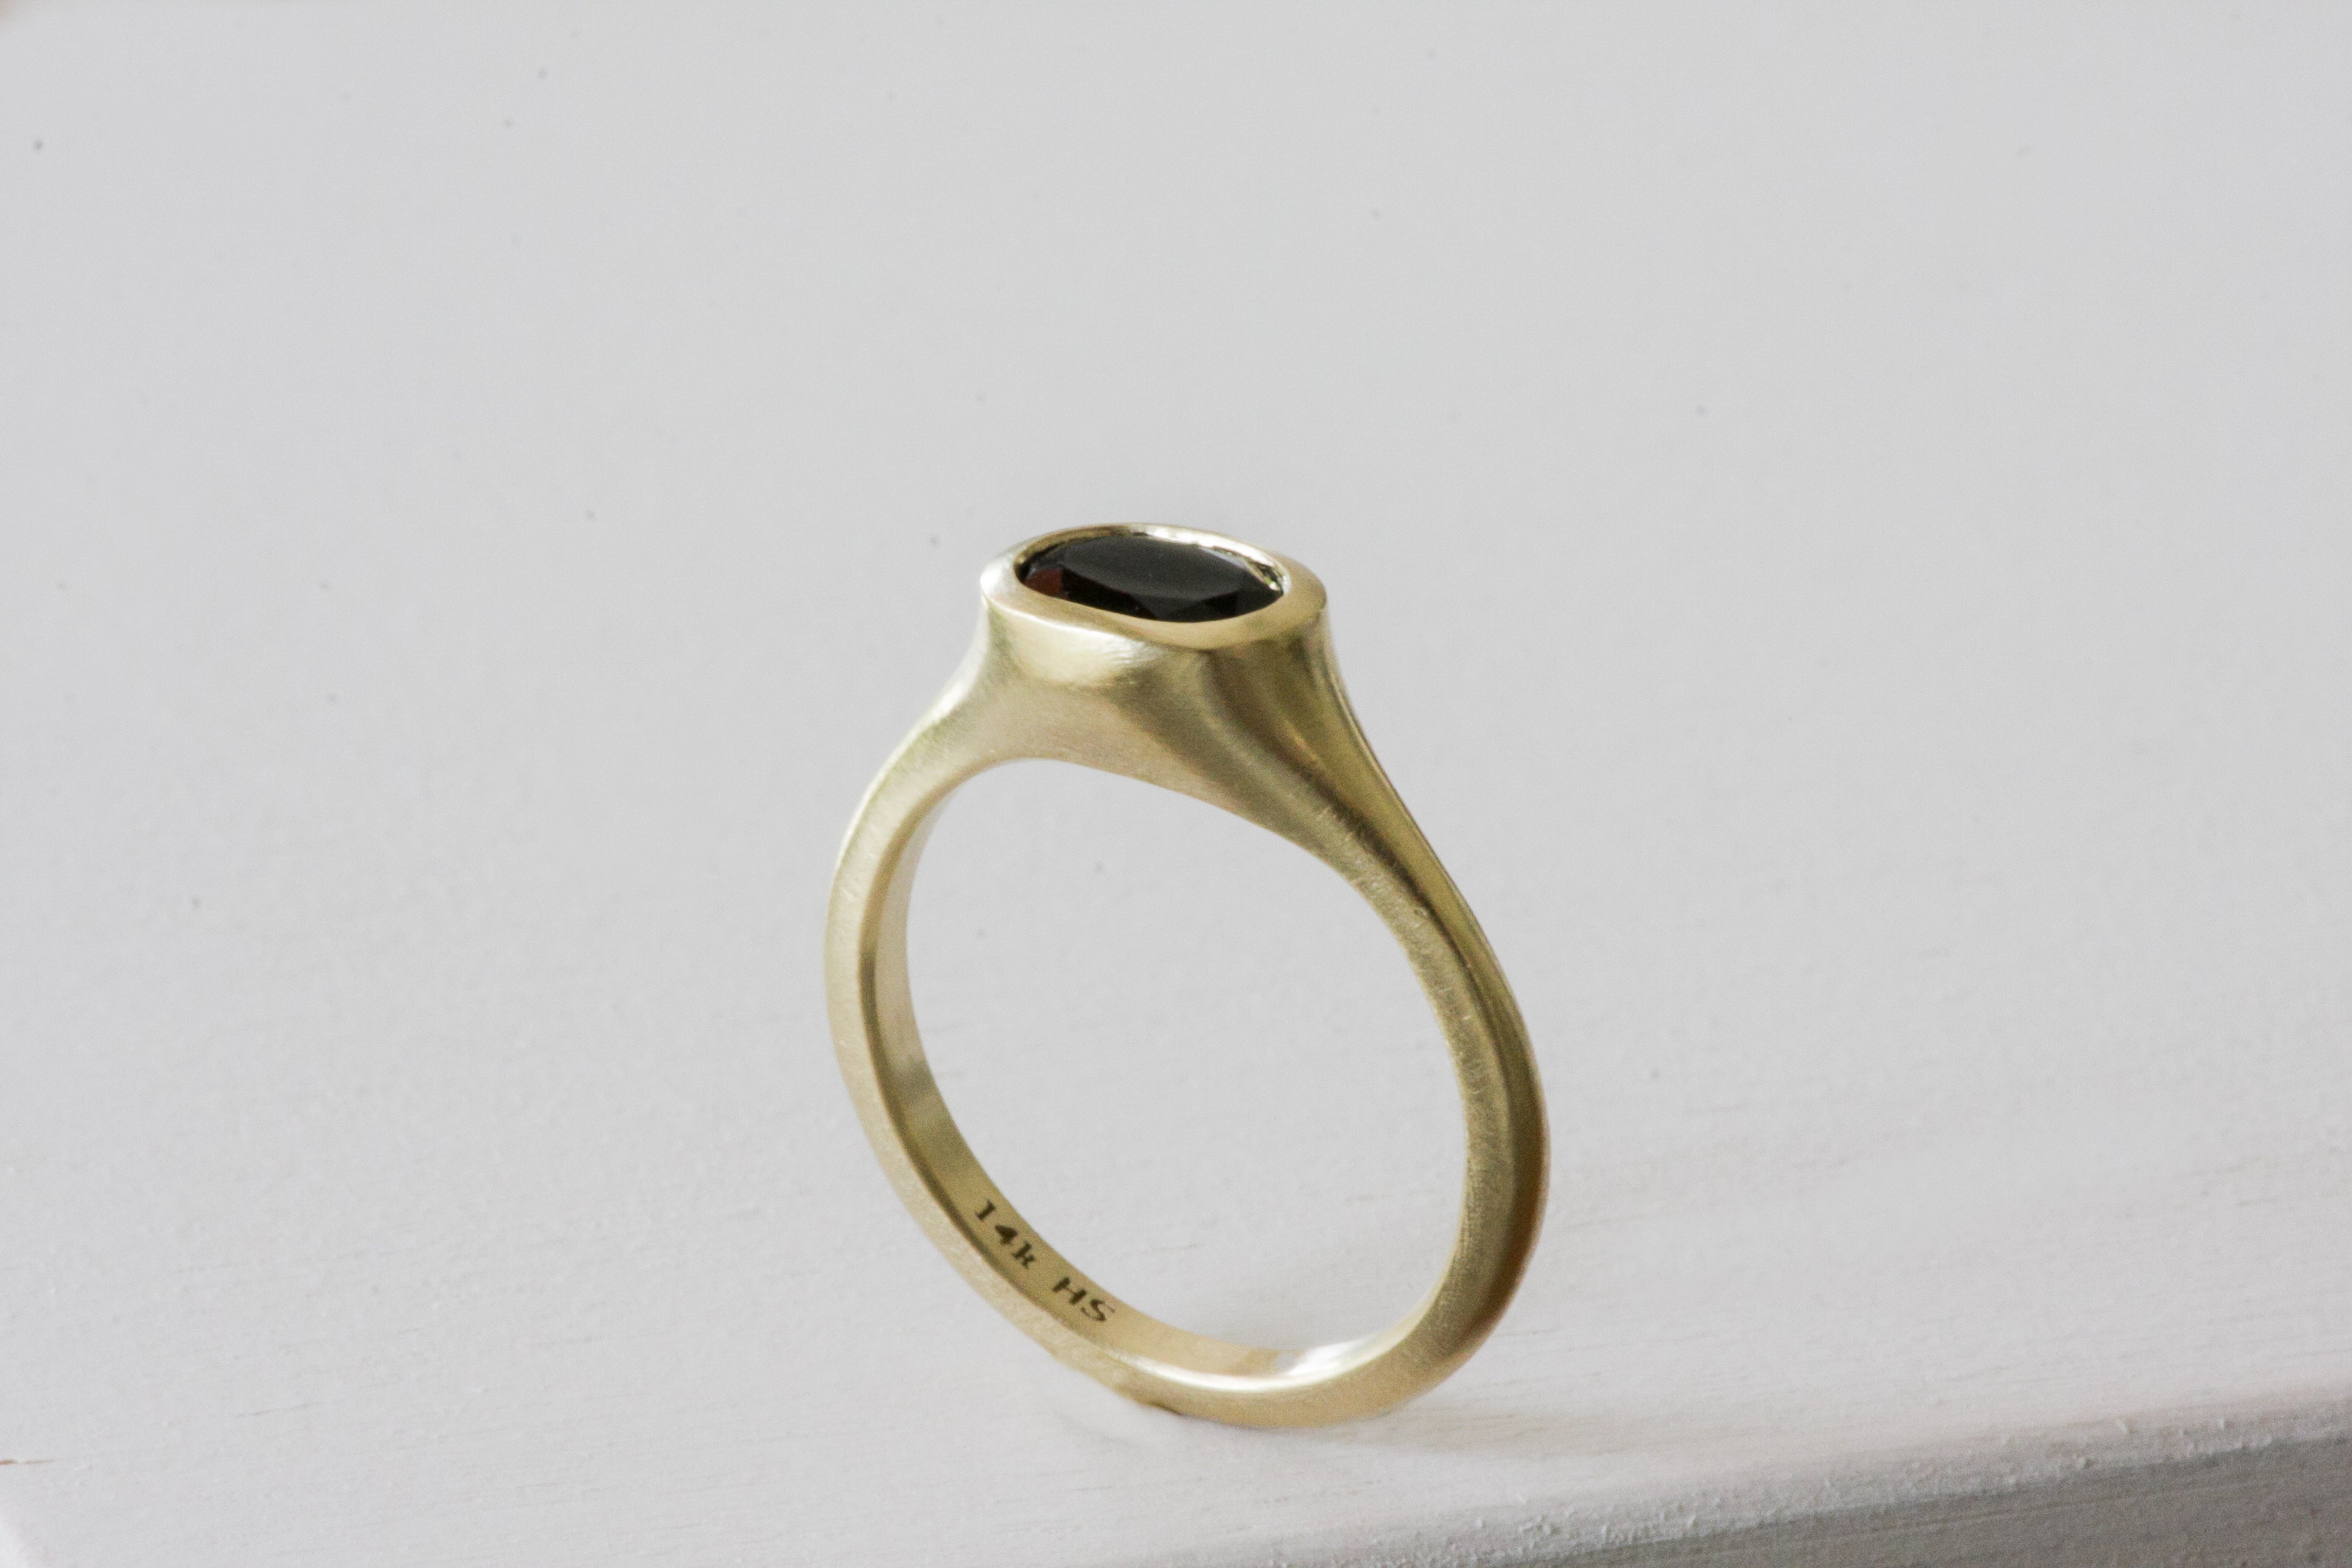 Queen Crown Gold & Onyx Signet Ring